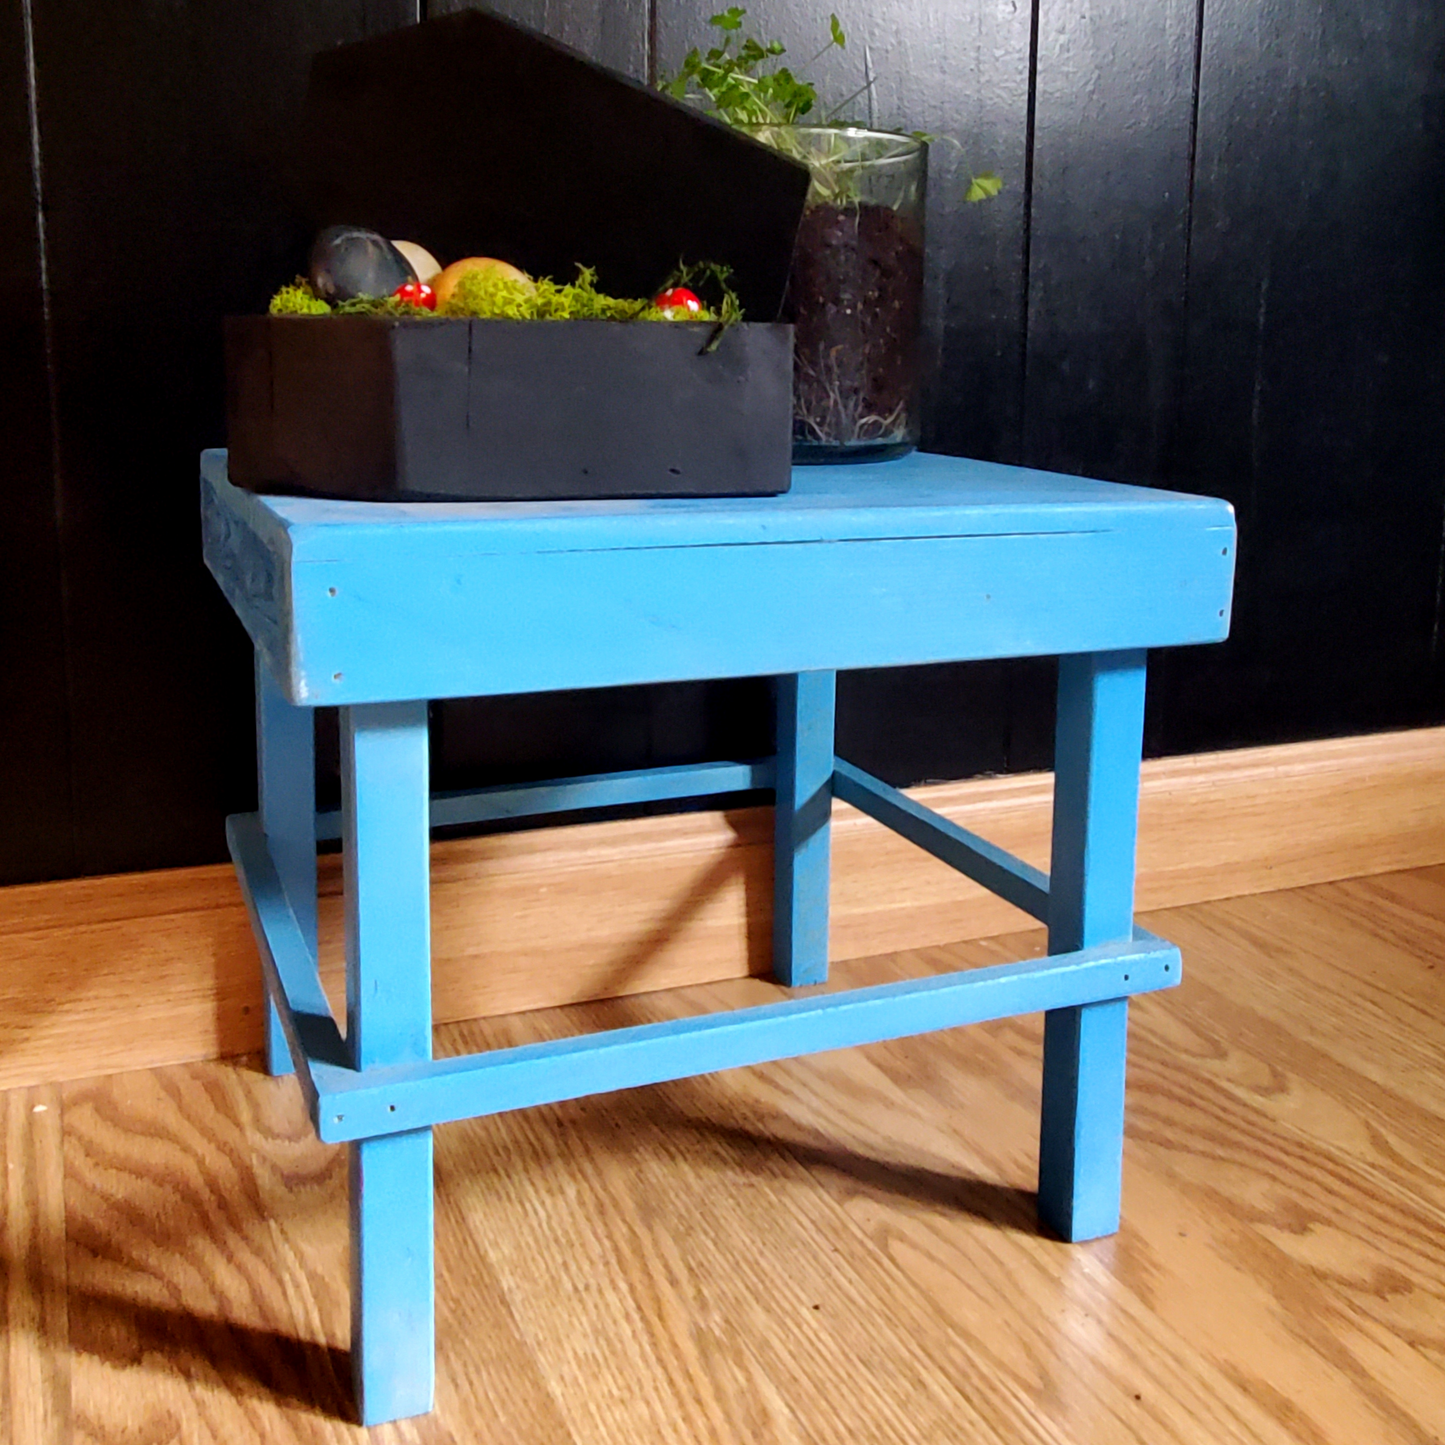 Blue Plant Stand or Small Kids Stool